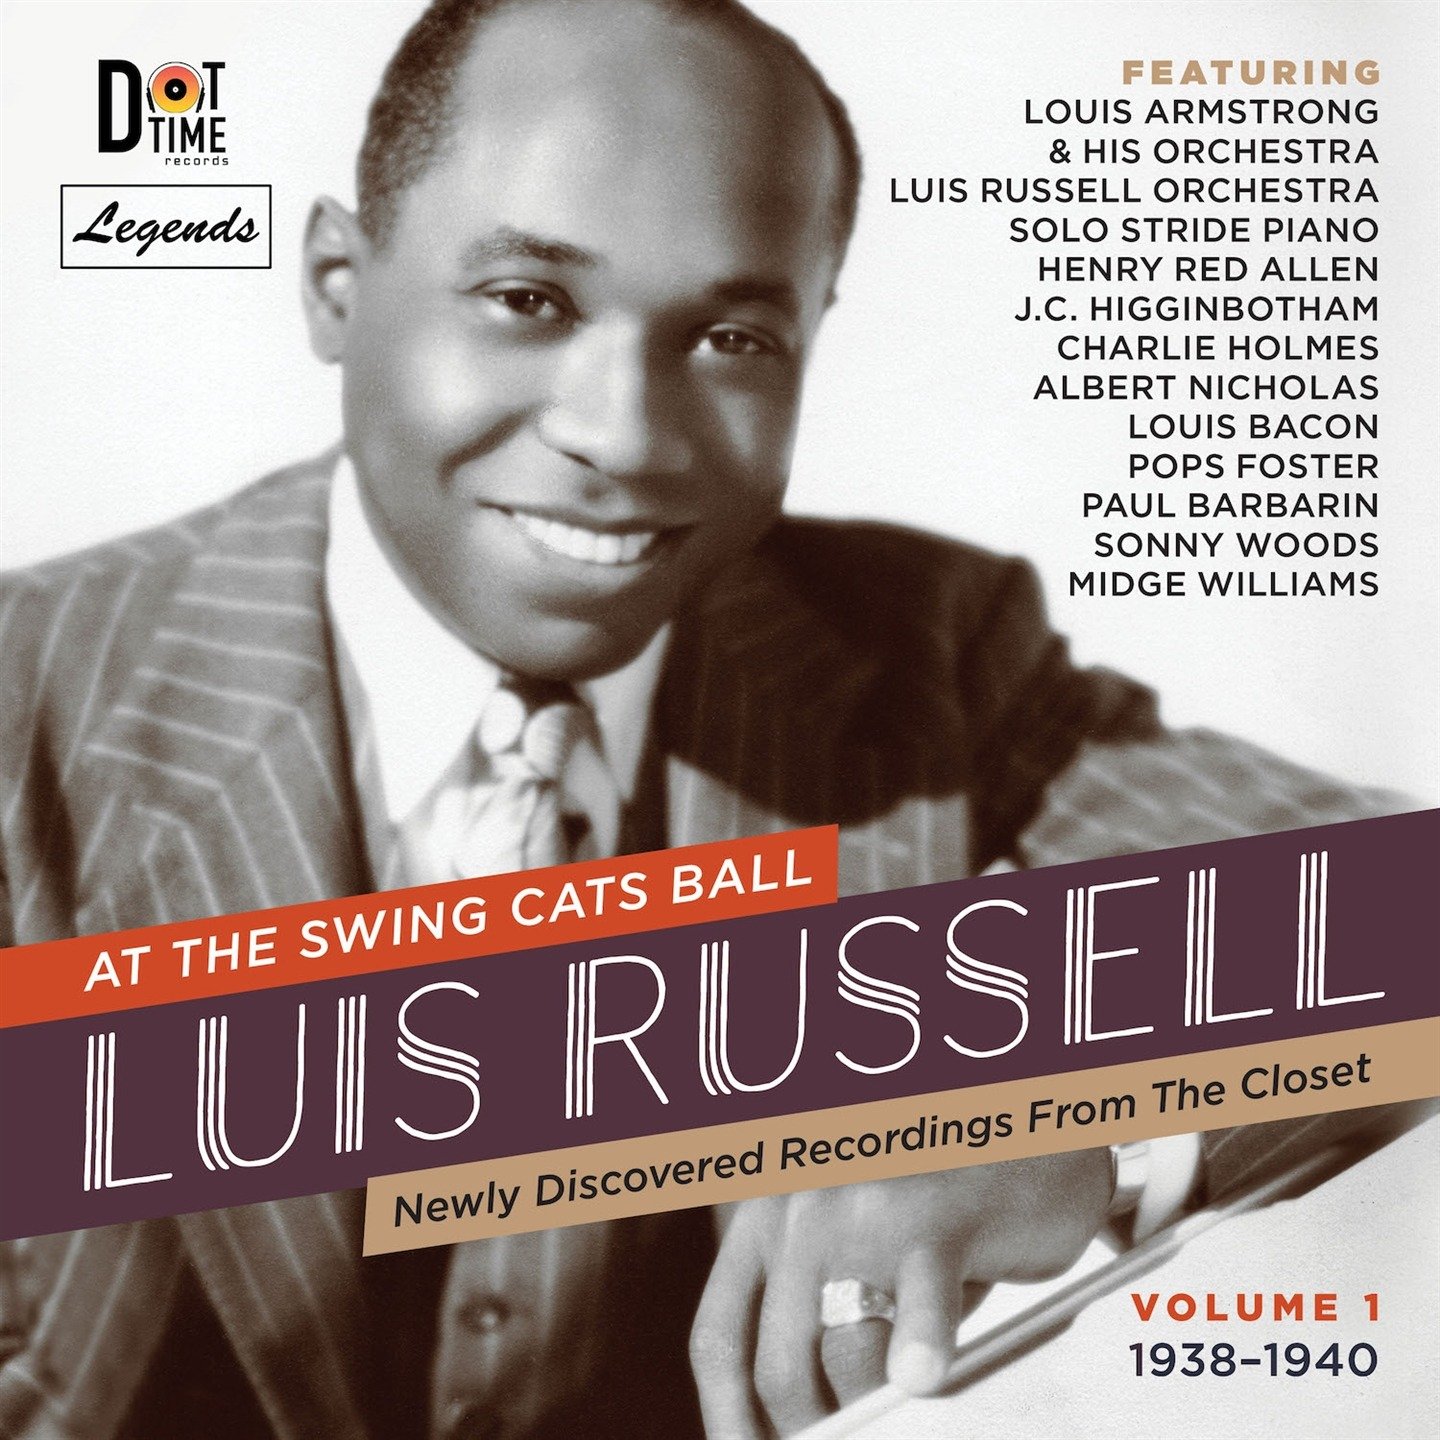 CD Shop - RUSSELL, LUIS NEWLY DISCOVERED RECORDINGS FROM THE CLOSET VOL.1